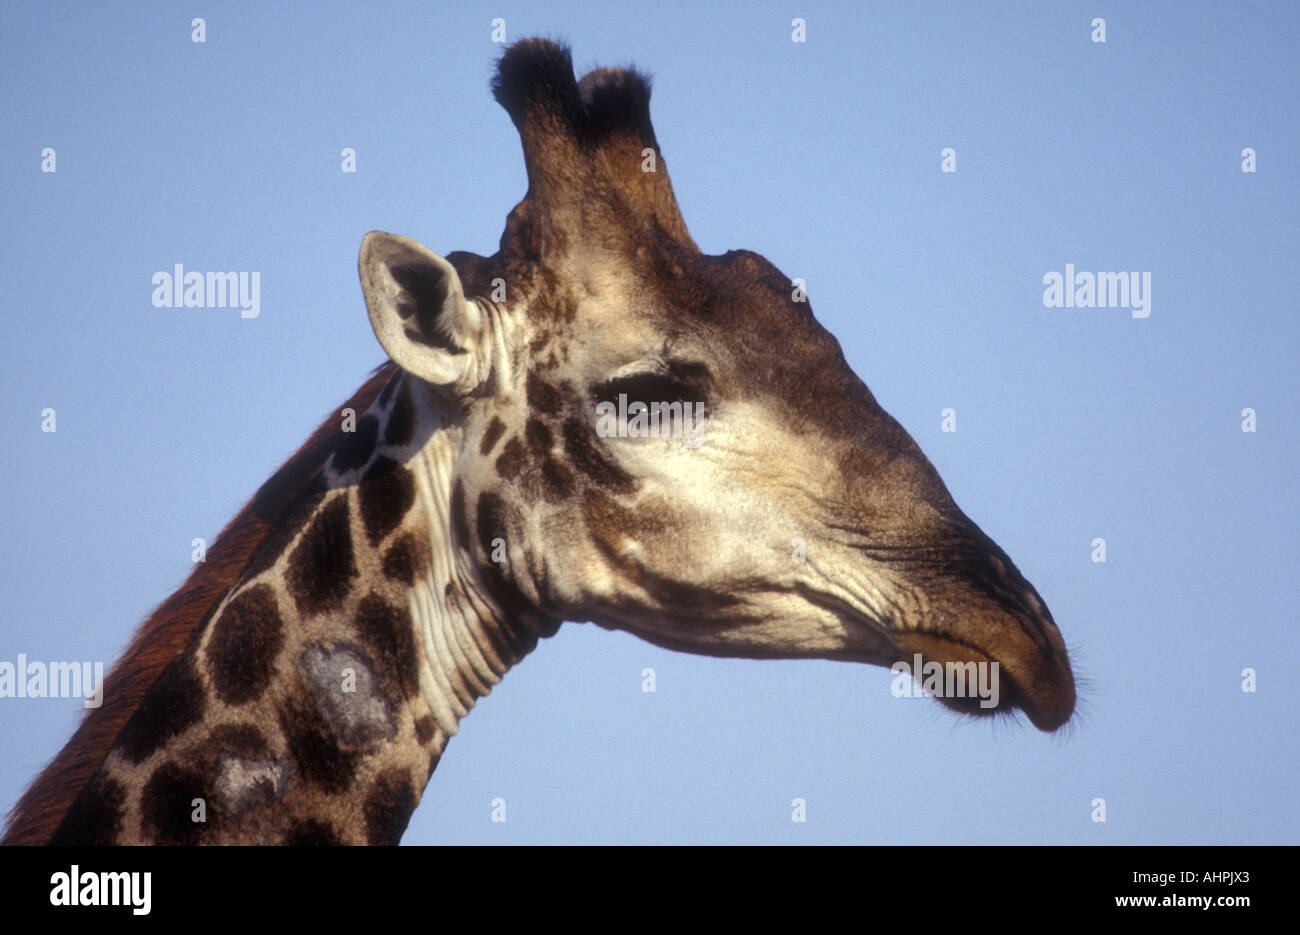 Close up portrait of Common Giraffe seen against a blue sky South Africa Stock Photo